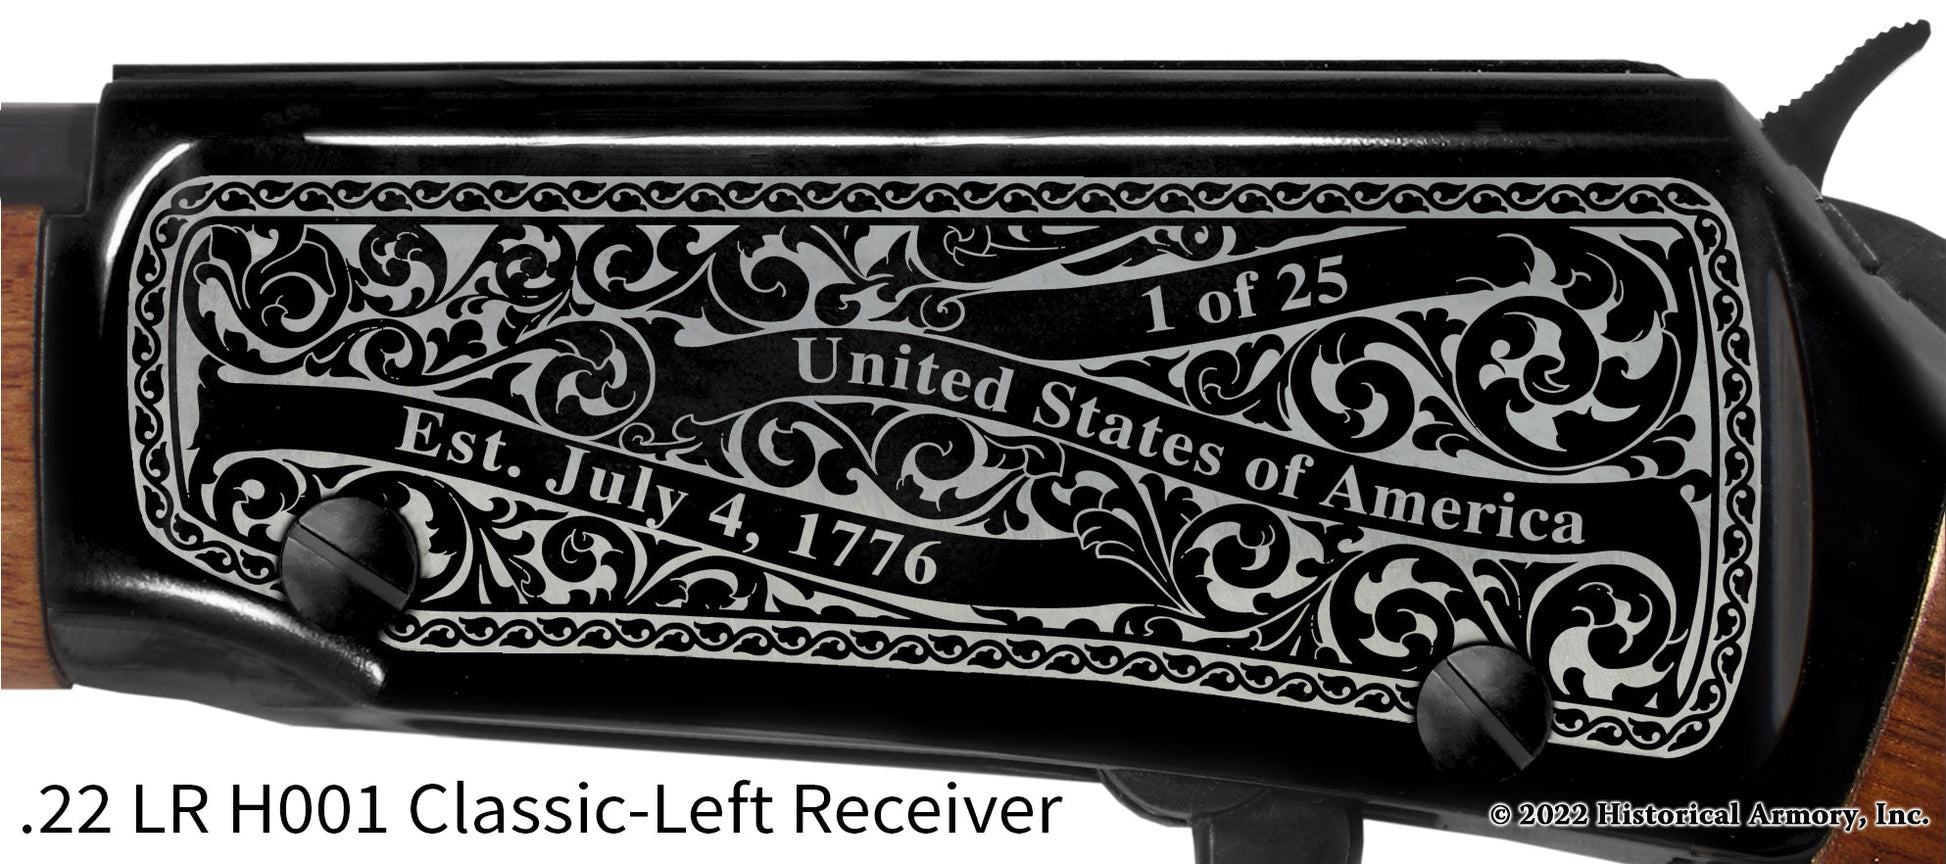 Cooper County Missouri Engraved Henry H001 Rifle